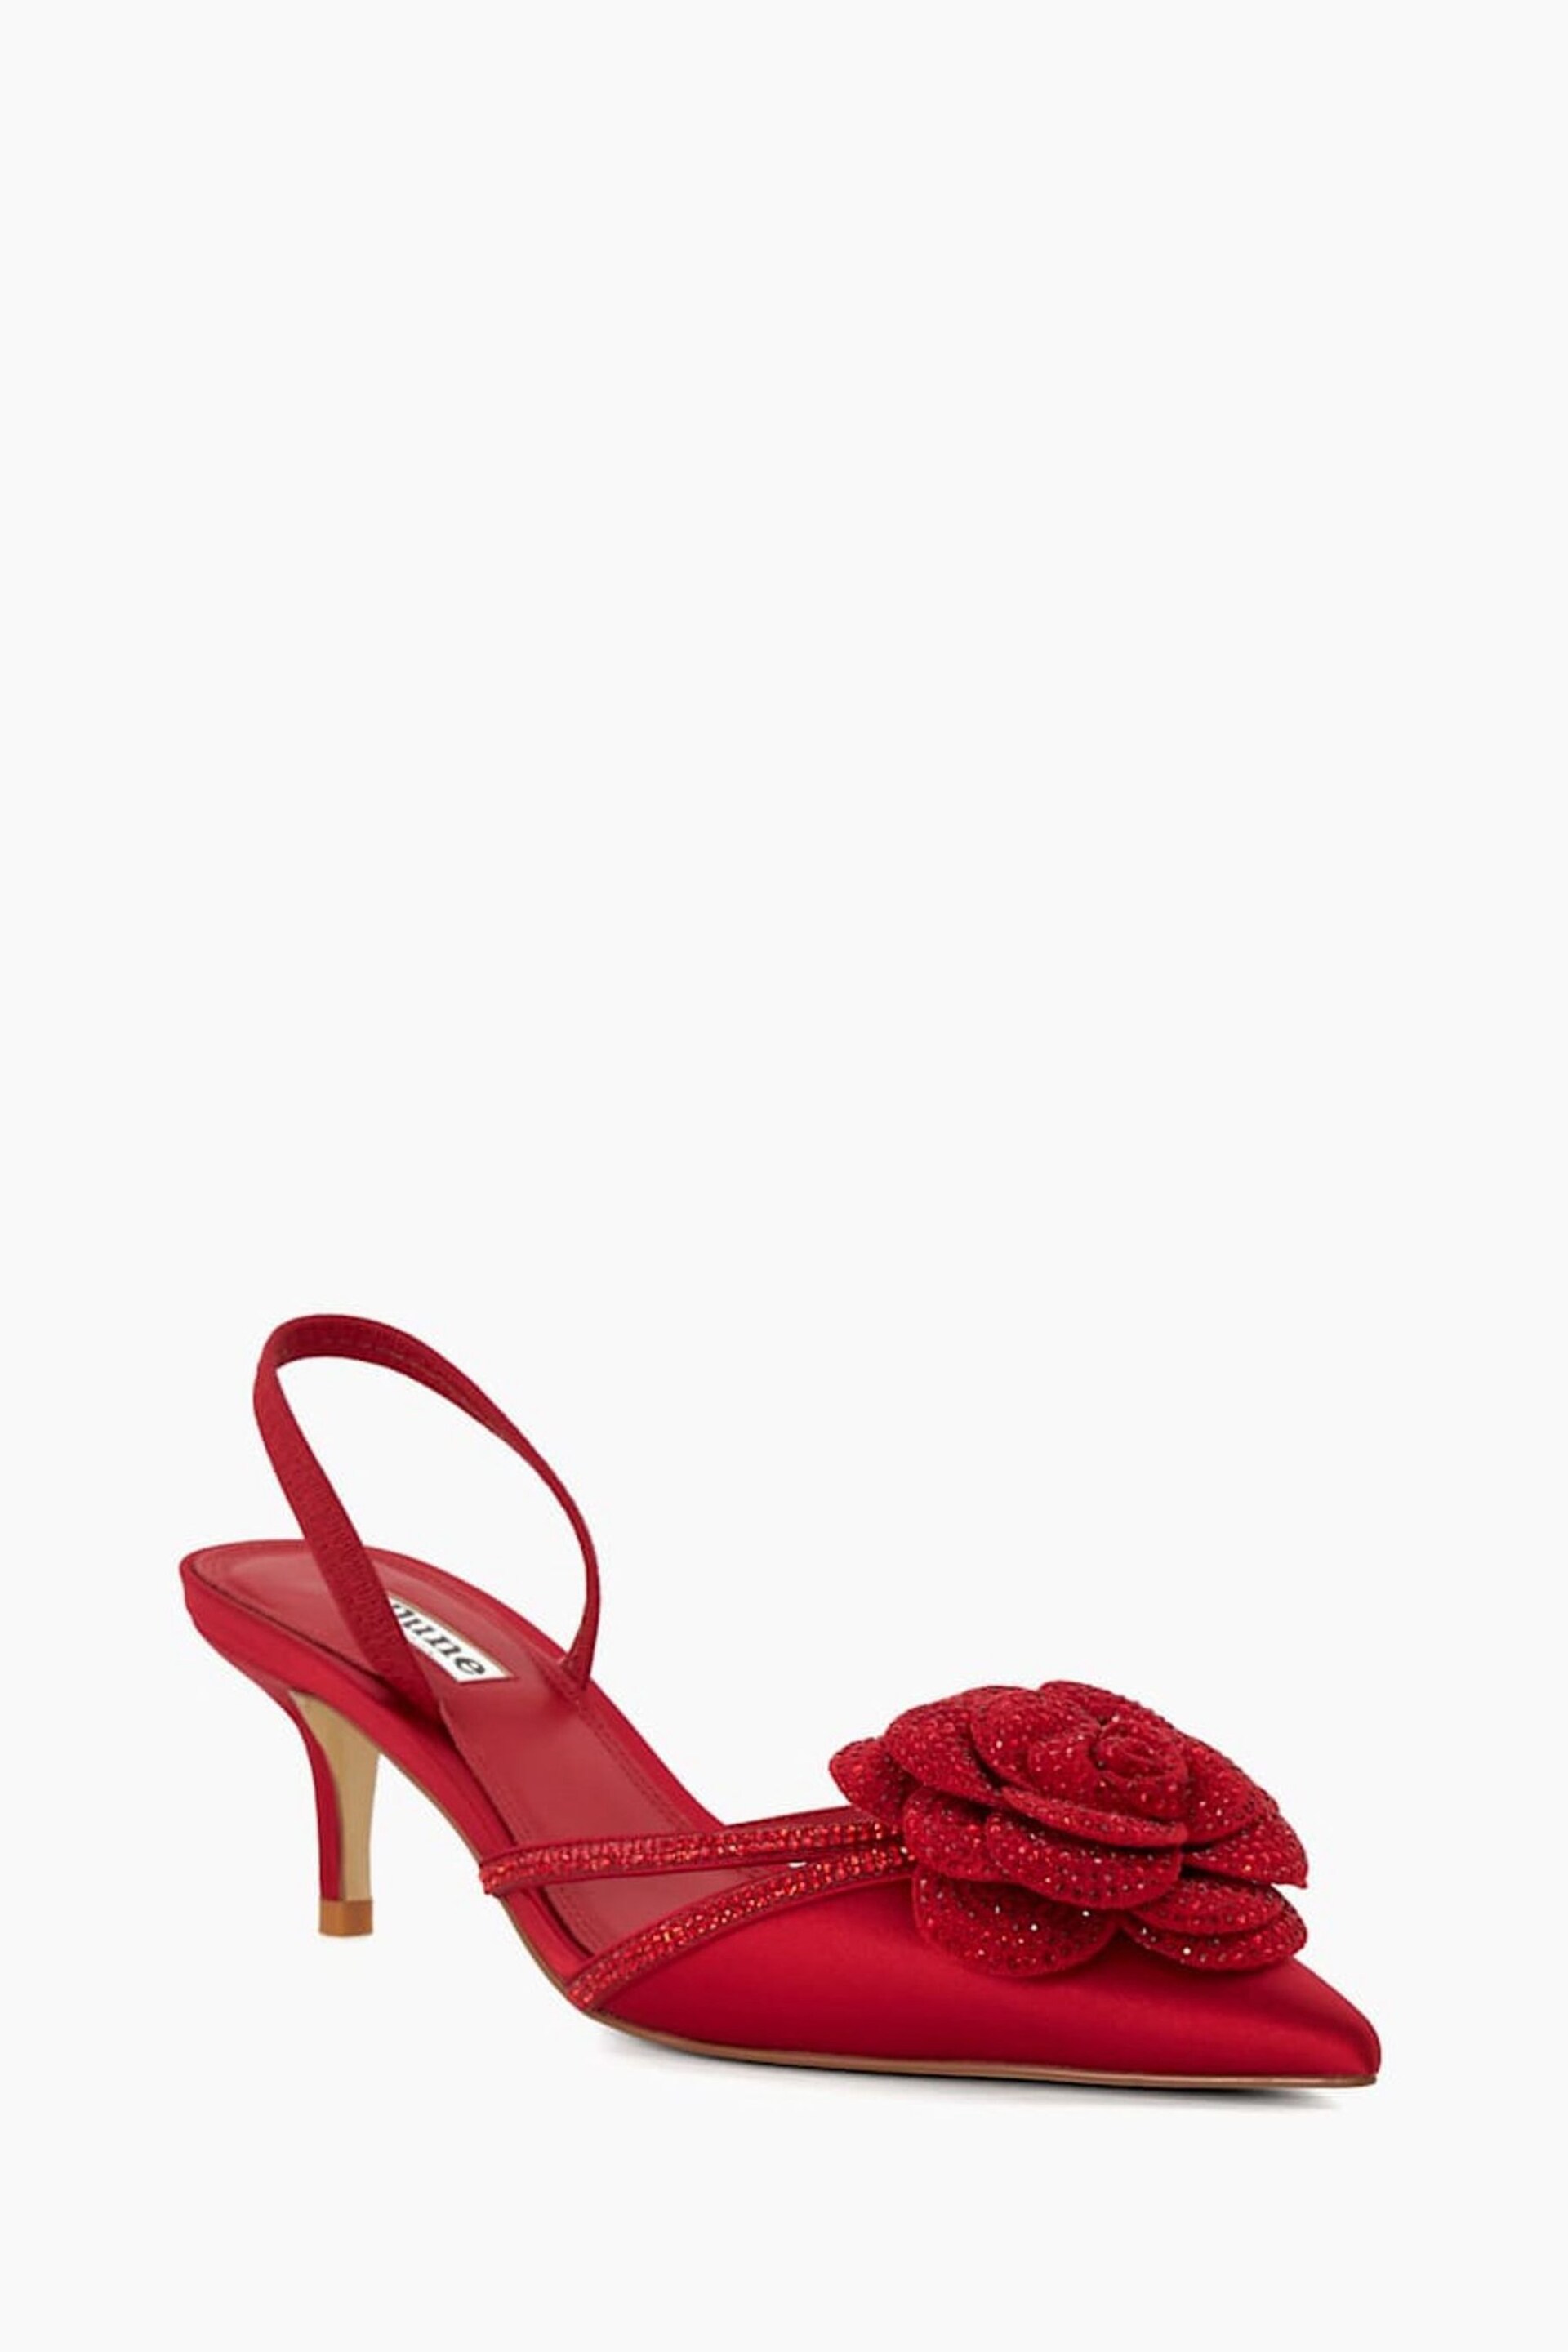 Dune London Red Dancehall Hot Ftx Corsage Courts - Image 2 of 5